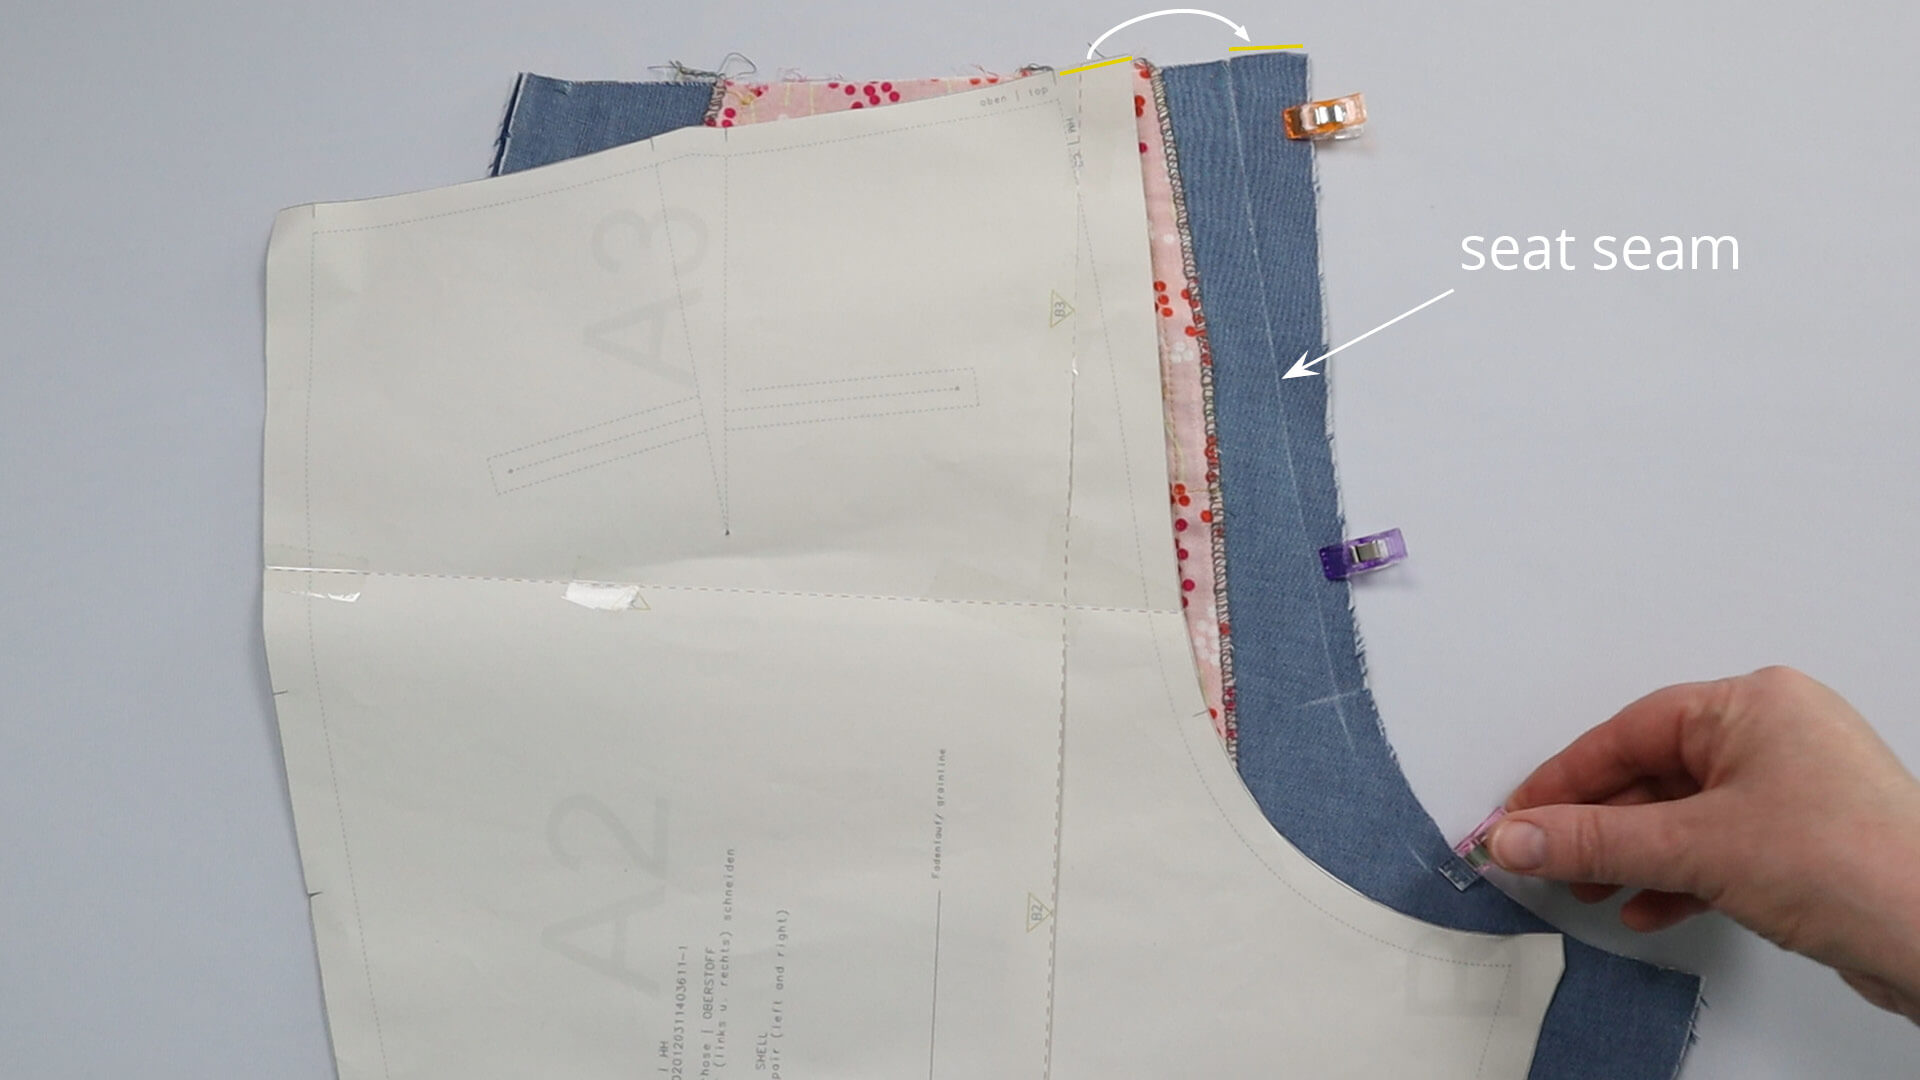 The picture shows how to mark the course of the seat seam.